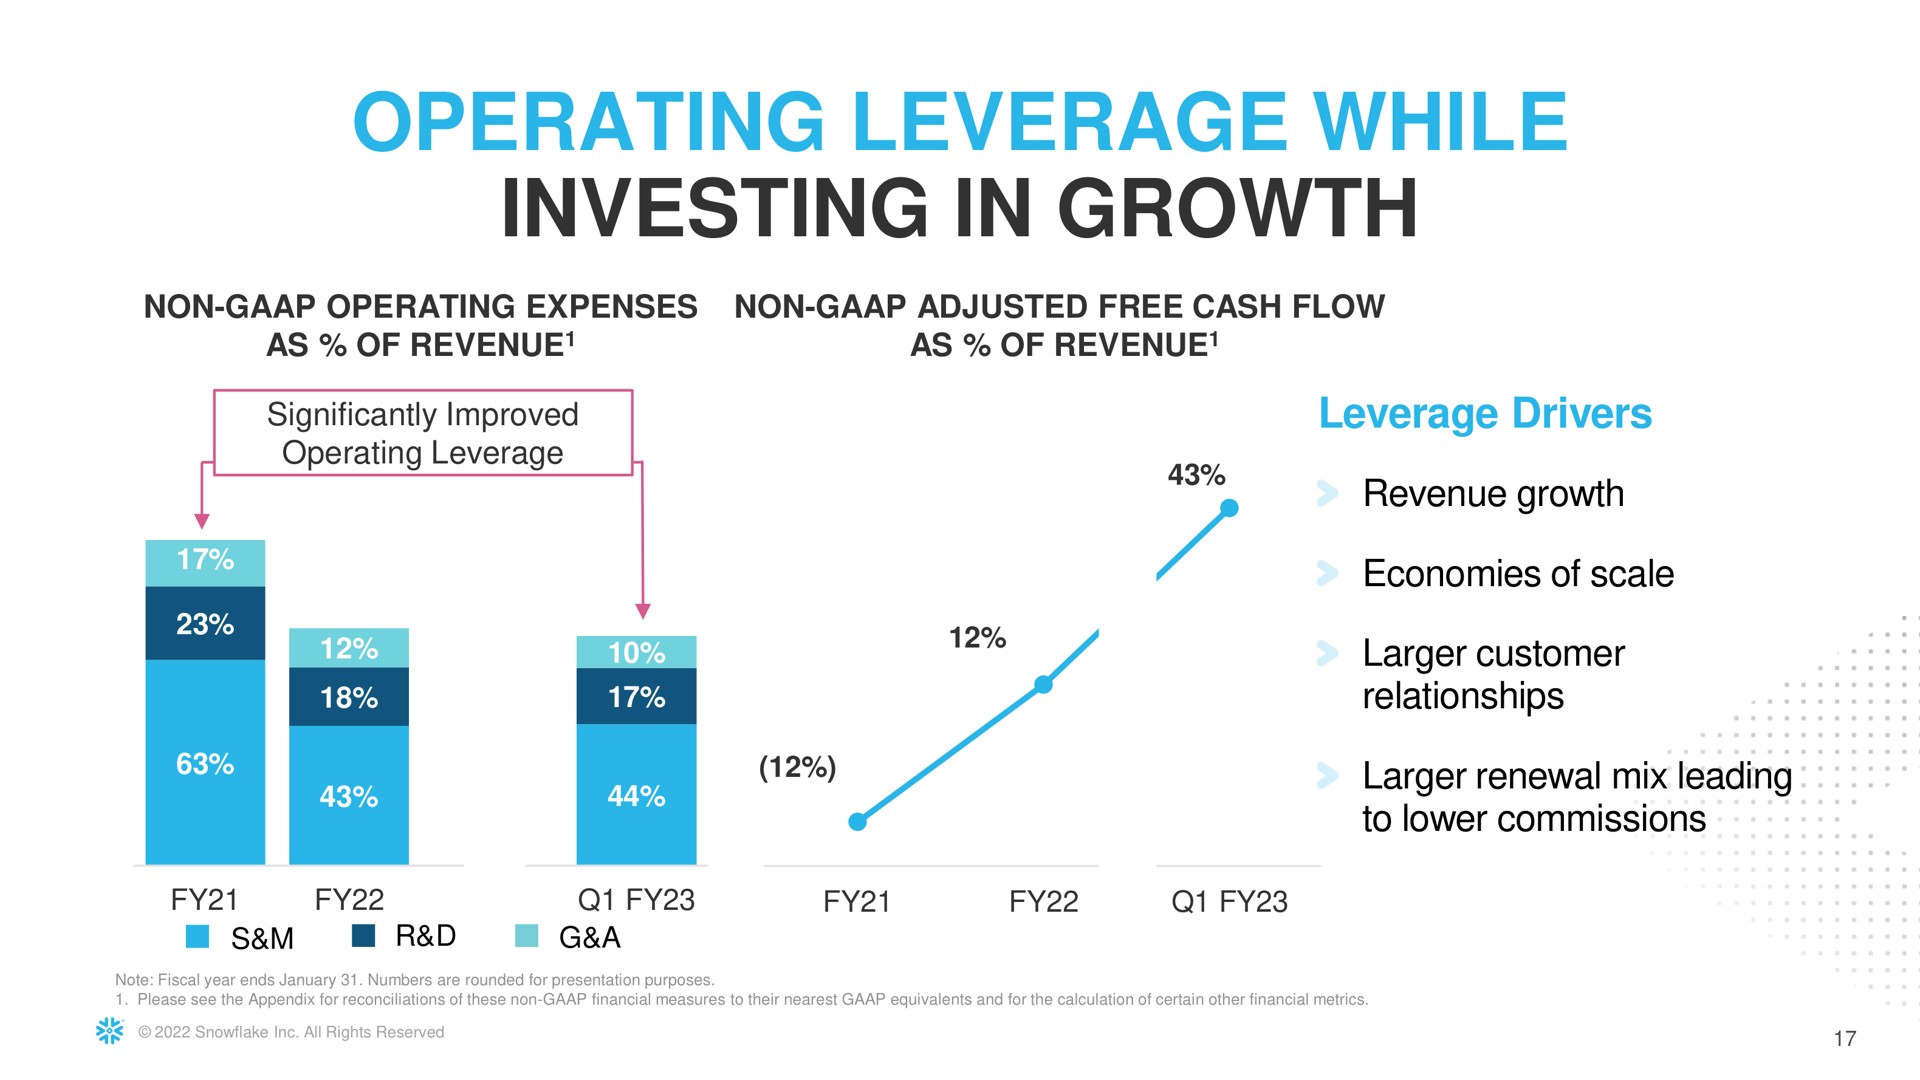 operating leverage while investing in growth ingrowth | Snowflake